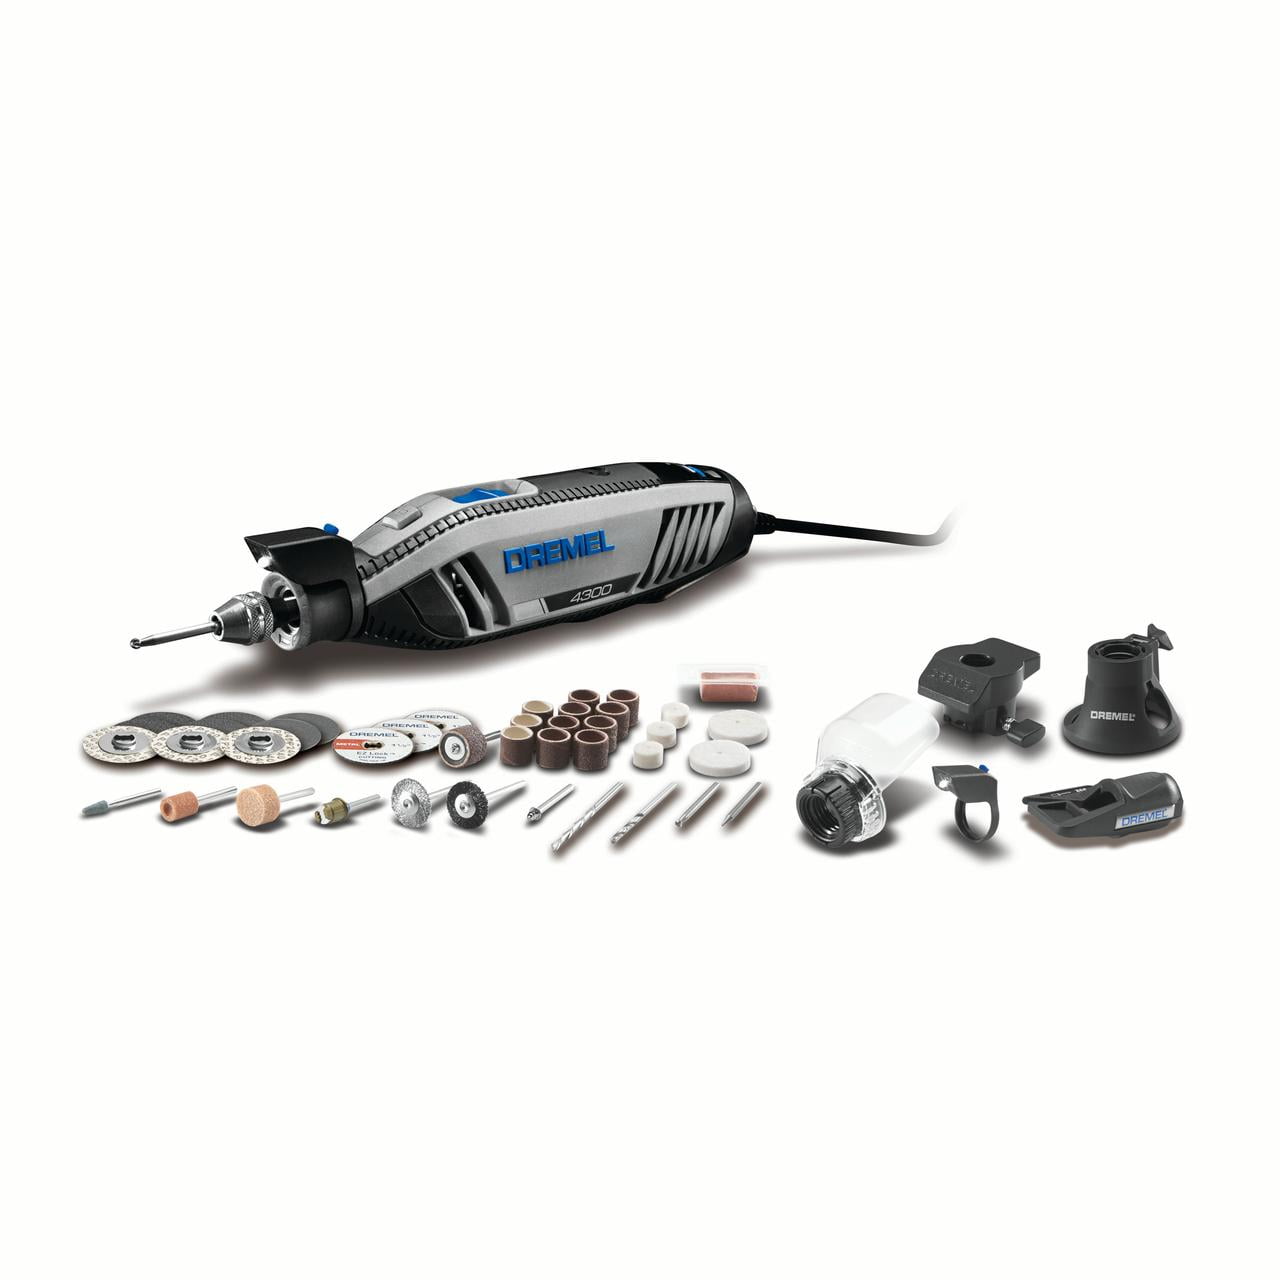 Dremel 4300-5/40 High Performance Rotary Tool Kit with Light- 5 Attachments & 40 Accessories- Engraver, Sander, and Polisher- Perfect for Grinding, Cutting, Wood Carving, Sanding, and Engraving -